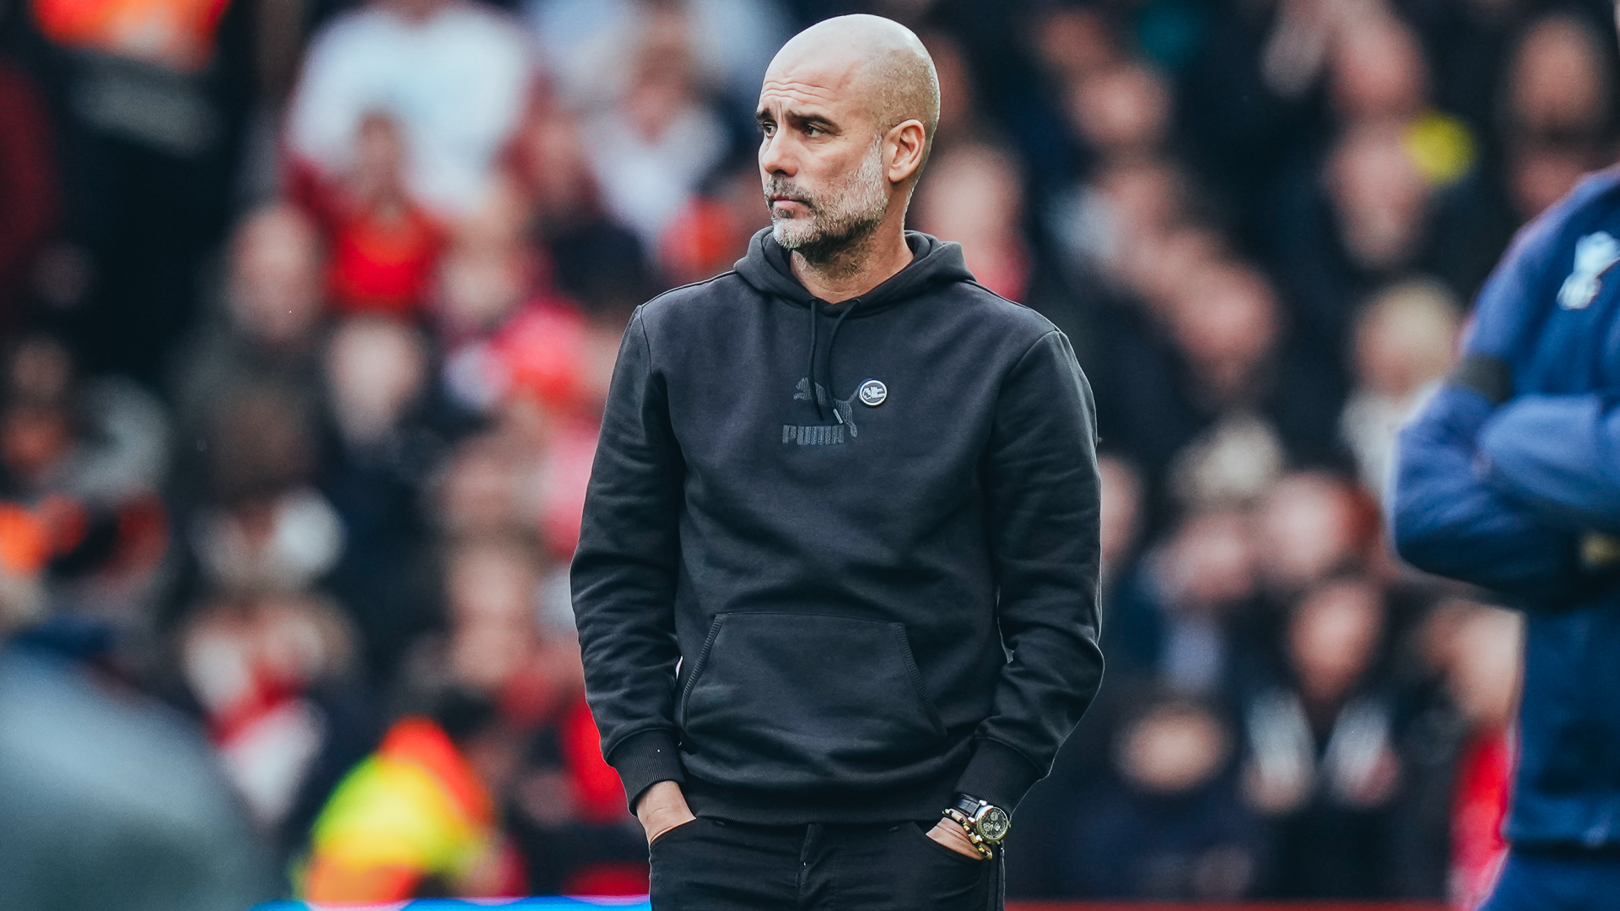 Guardiola praises display but rues City's missed chances after Forest draw